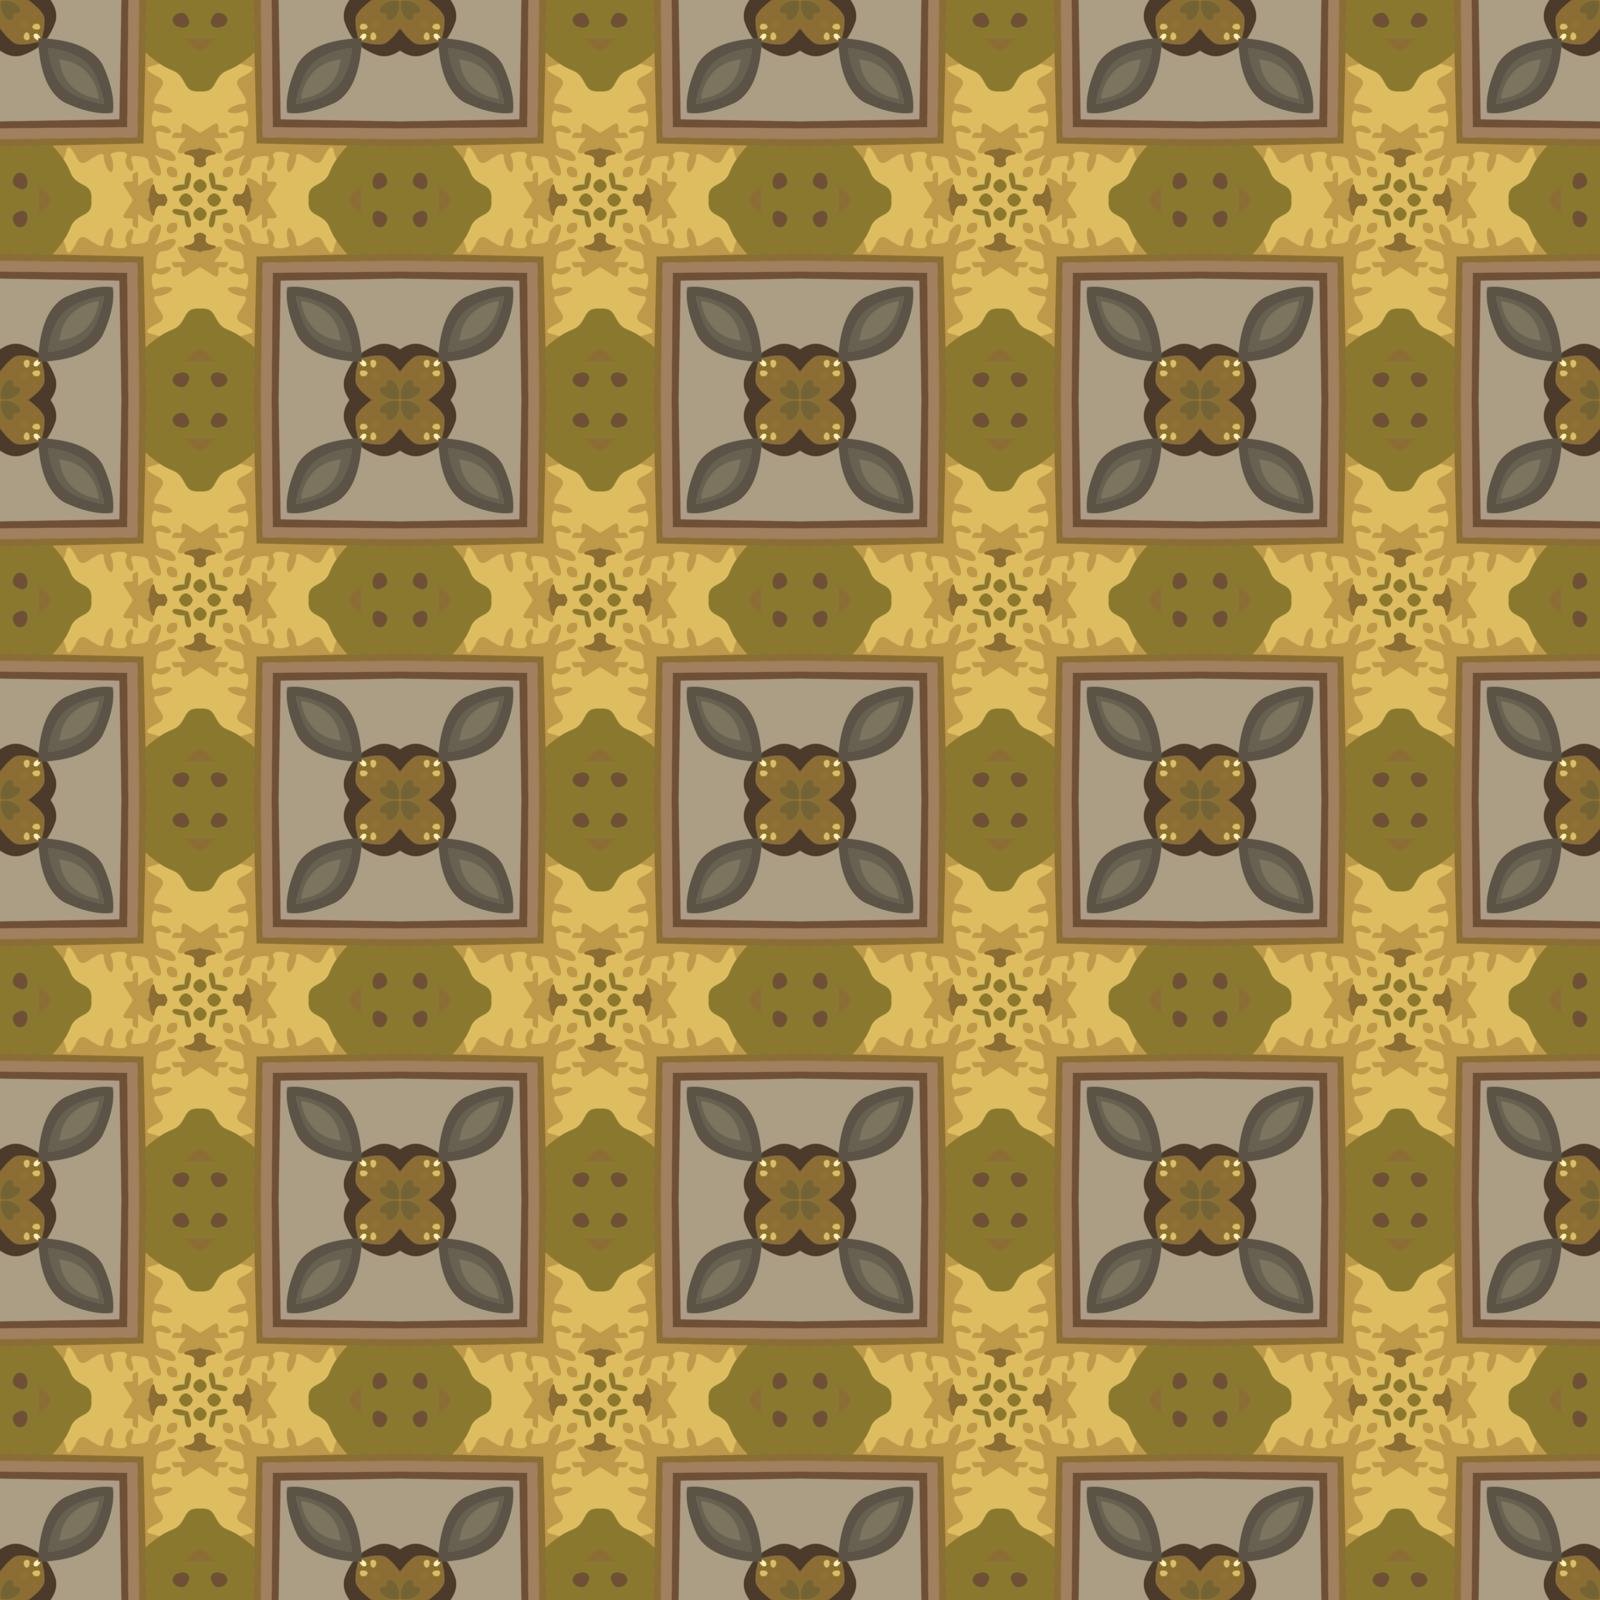 Seamless illustrated pattern made of abstract elements in beige,yellow, gray and brown